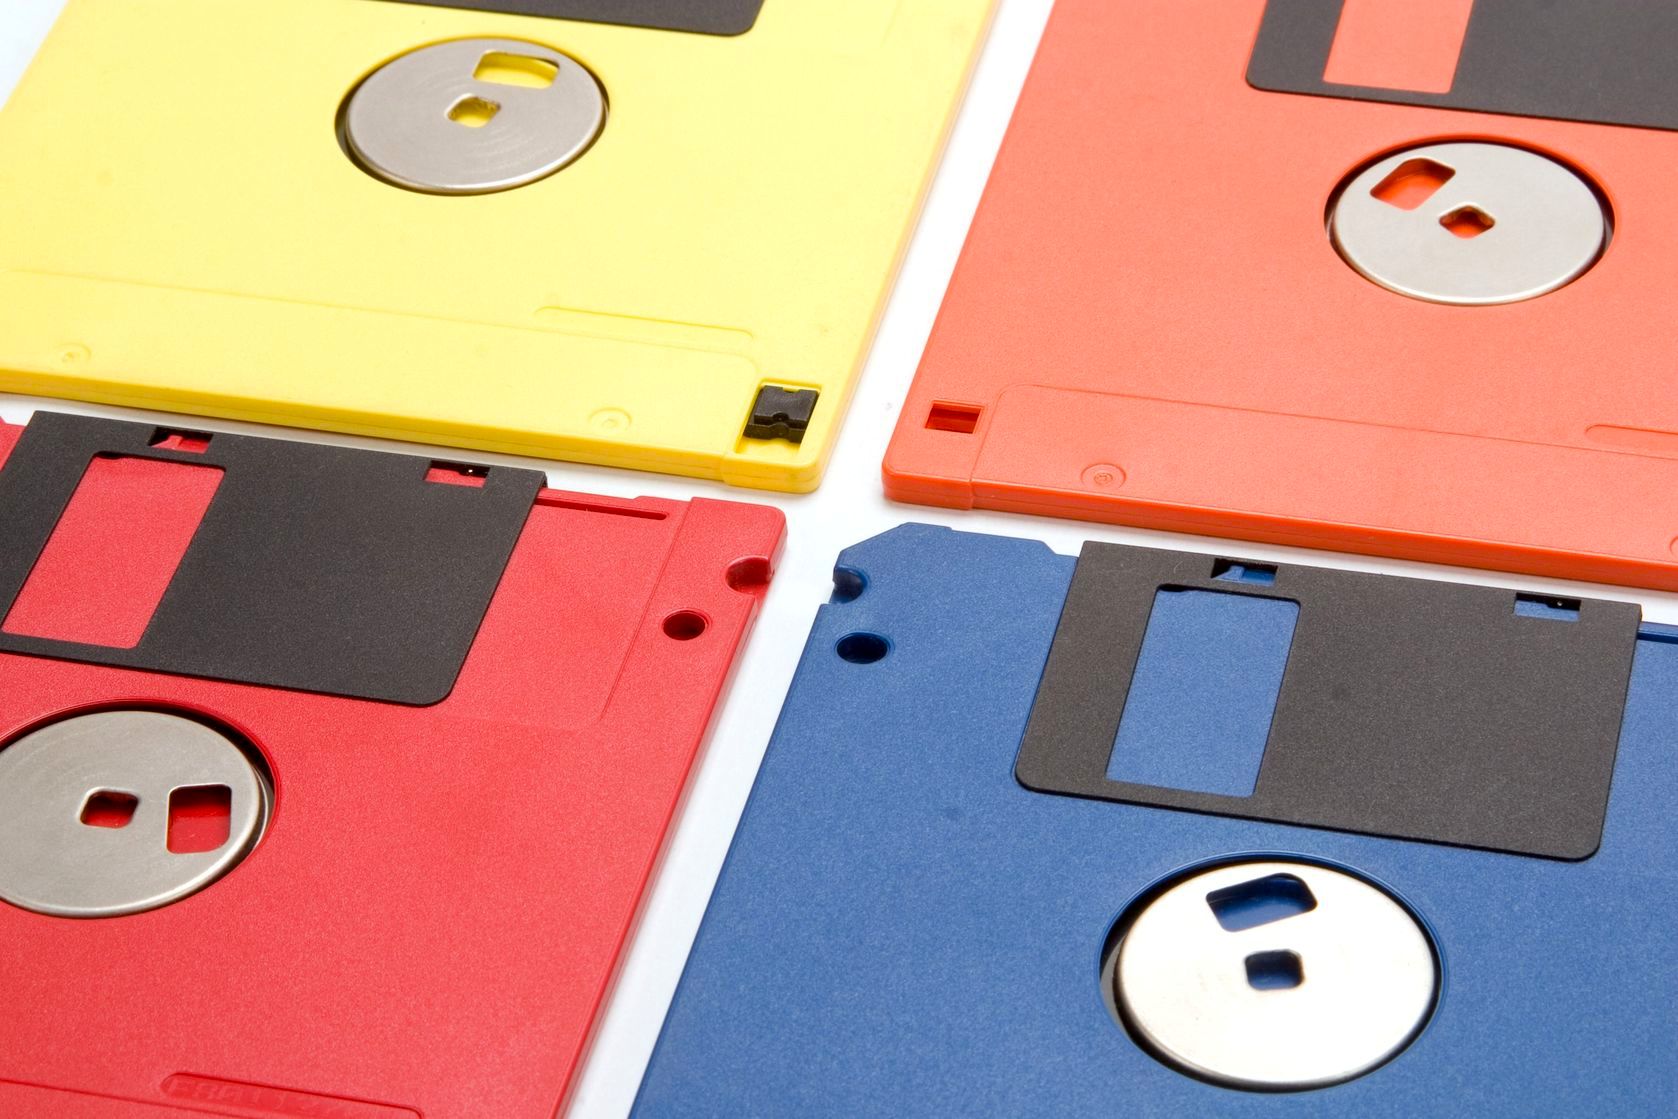 Floppy disks are finally on the way out in Japan …
maybe